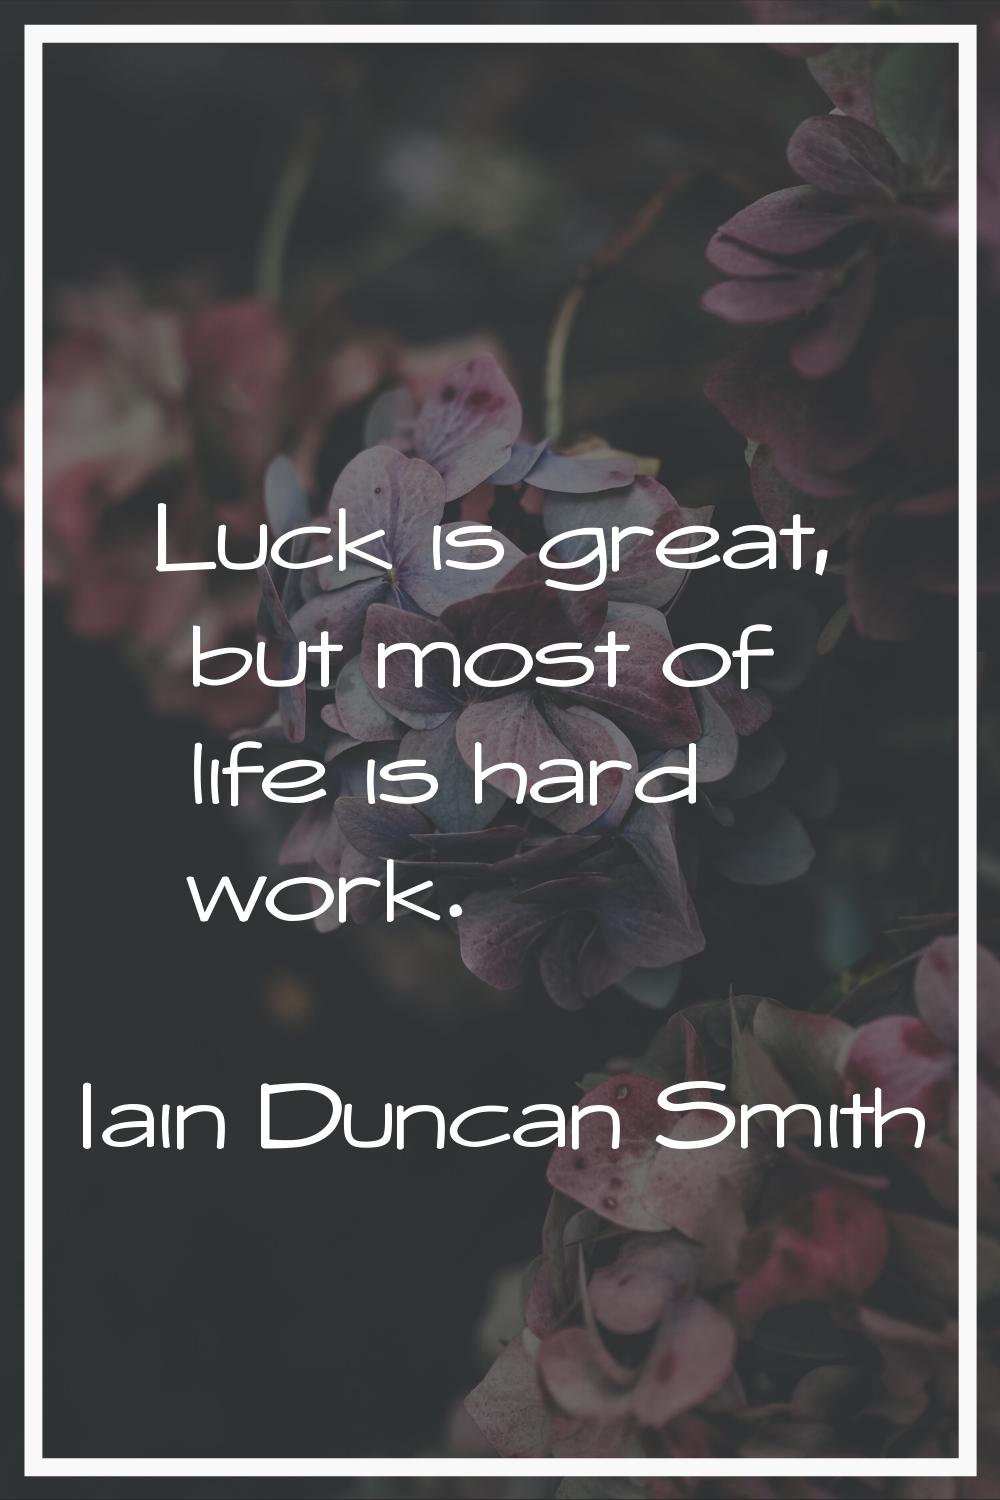 Luck is great, but most of life is hard work.